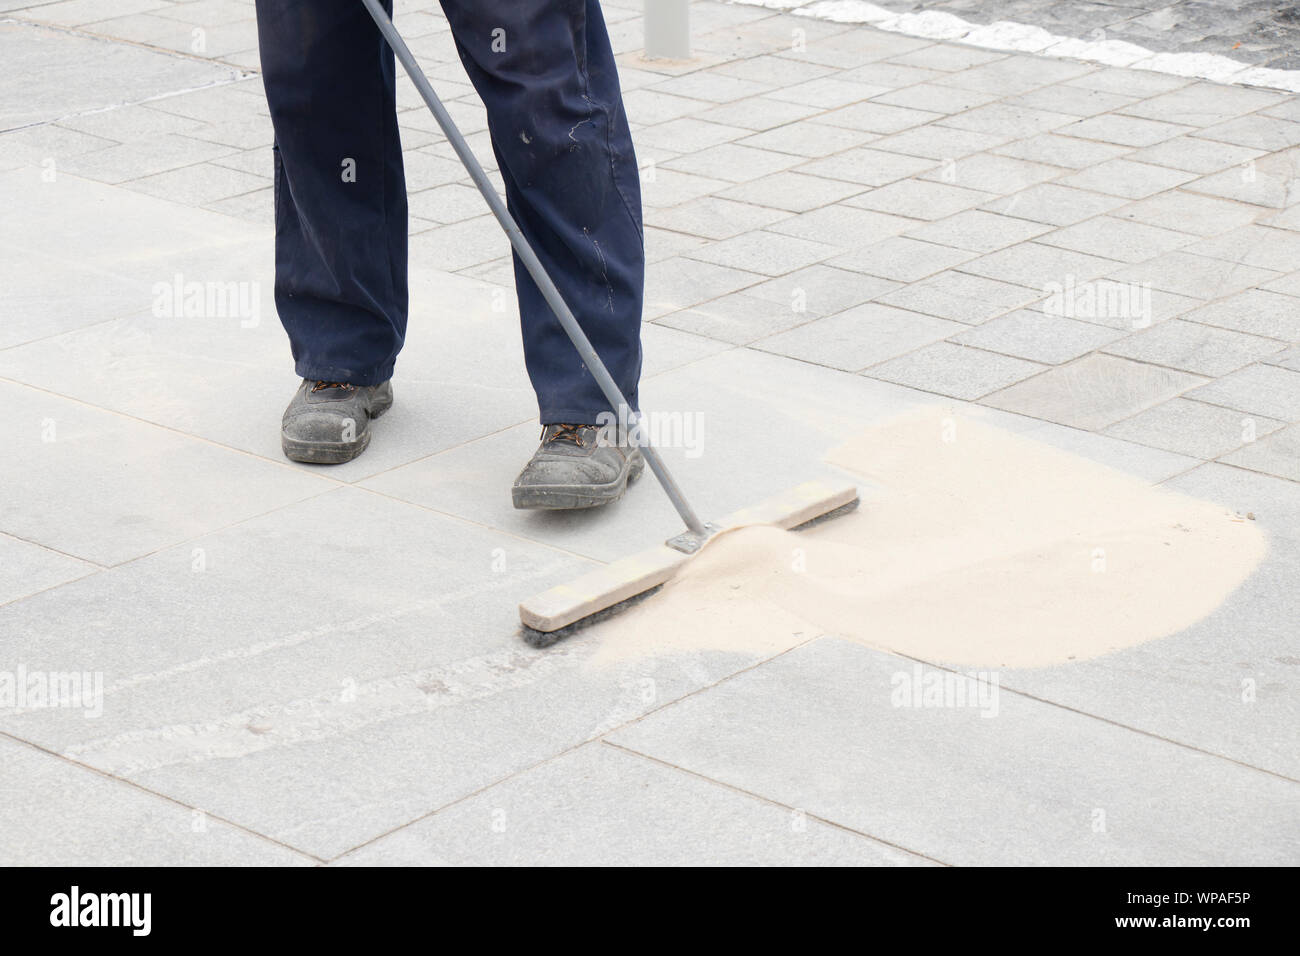 Pavement construction worker filling the block joints with sand using long broom, finishing road paving Stock Photo